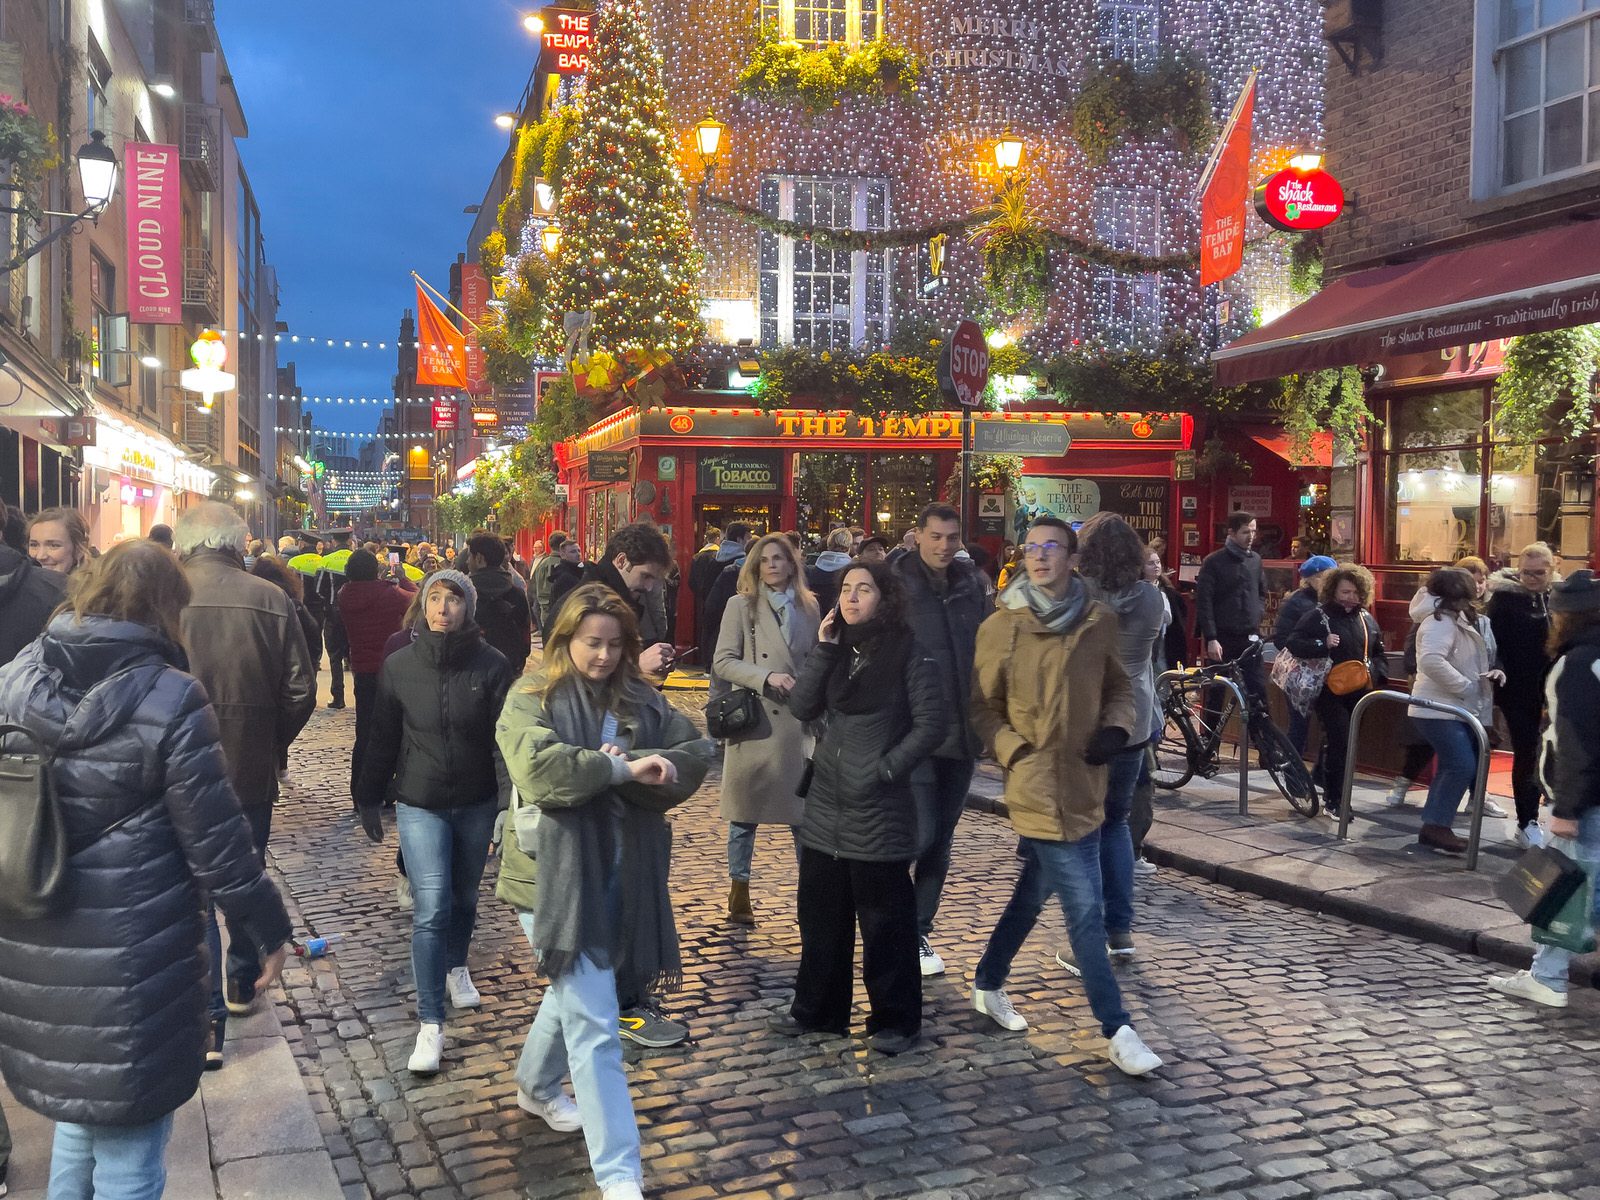 I VISITED TEMPLE BAR TODAY [AS NIGHTFALL WAS APPROACHING]-225357-1